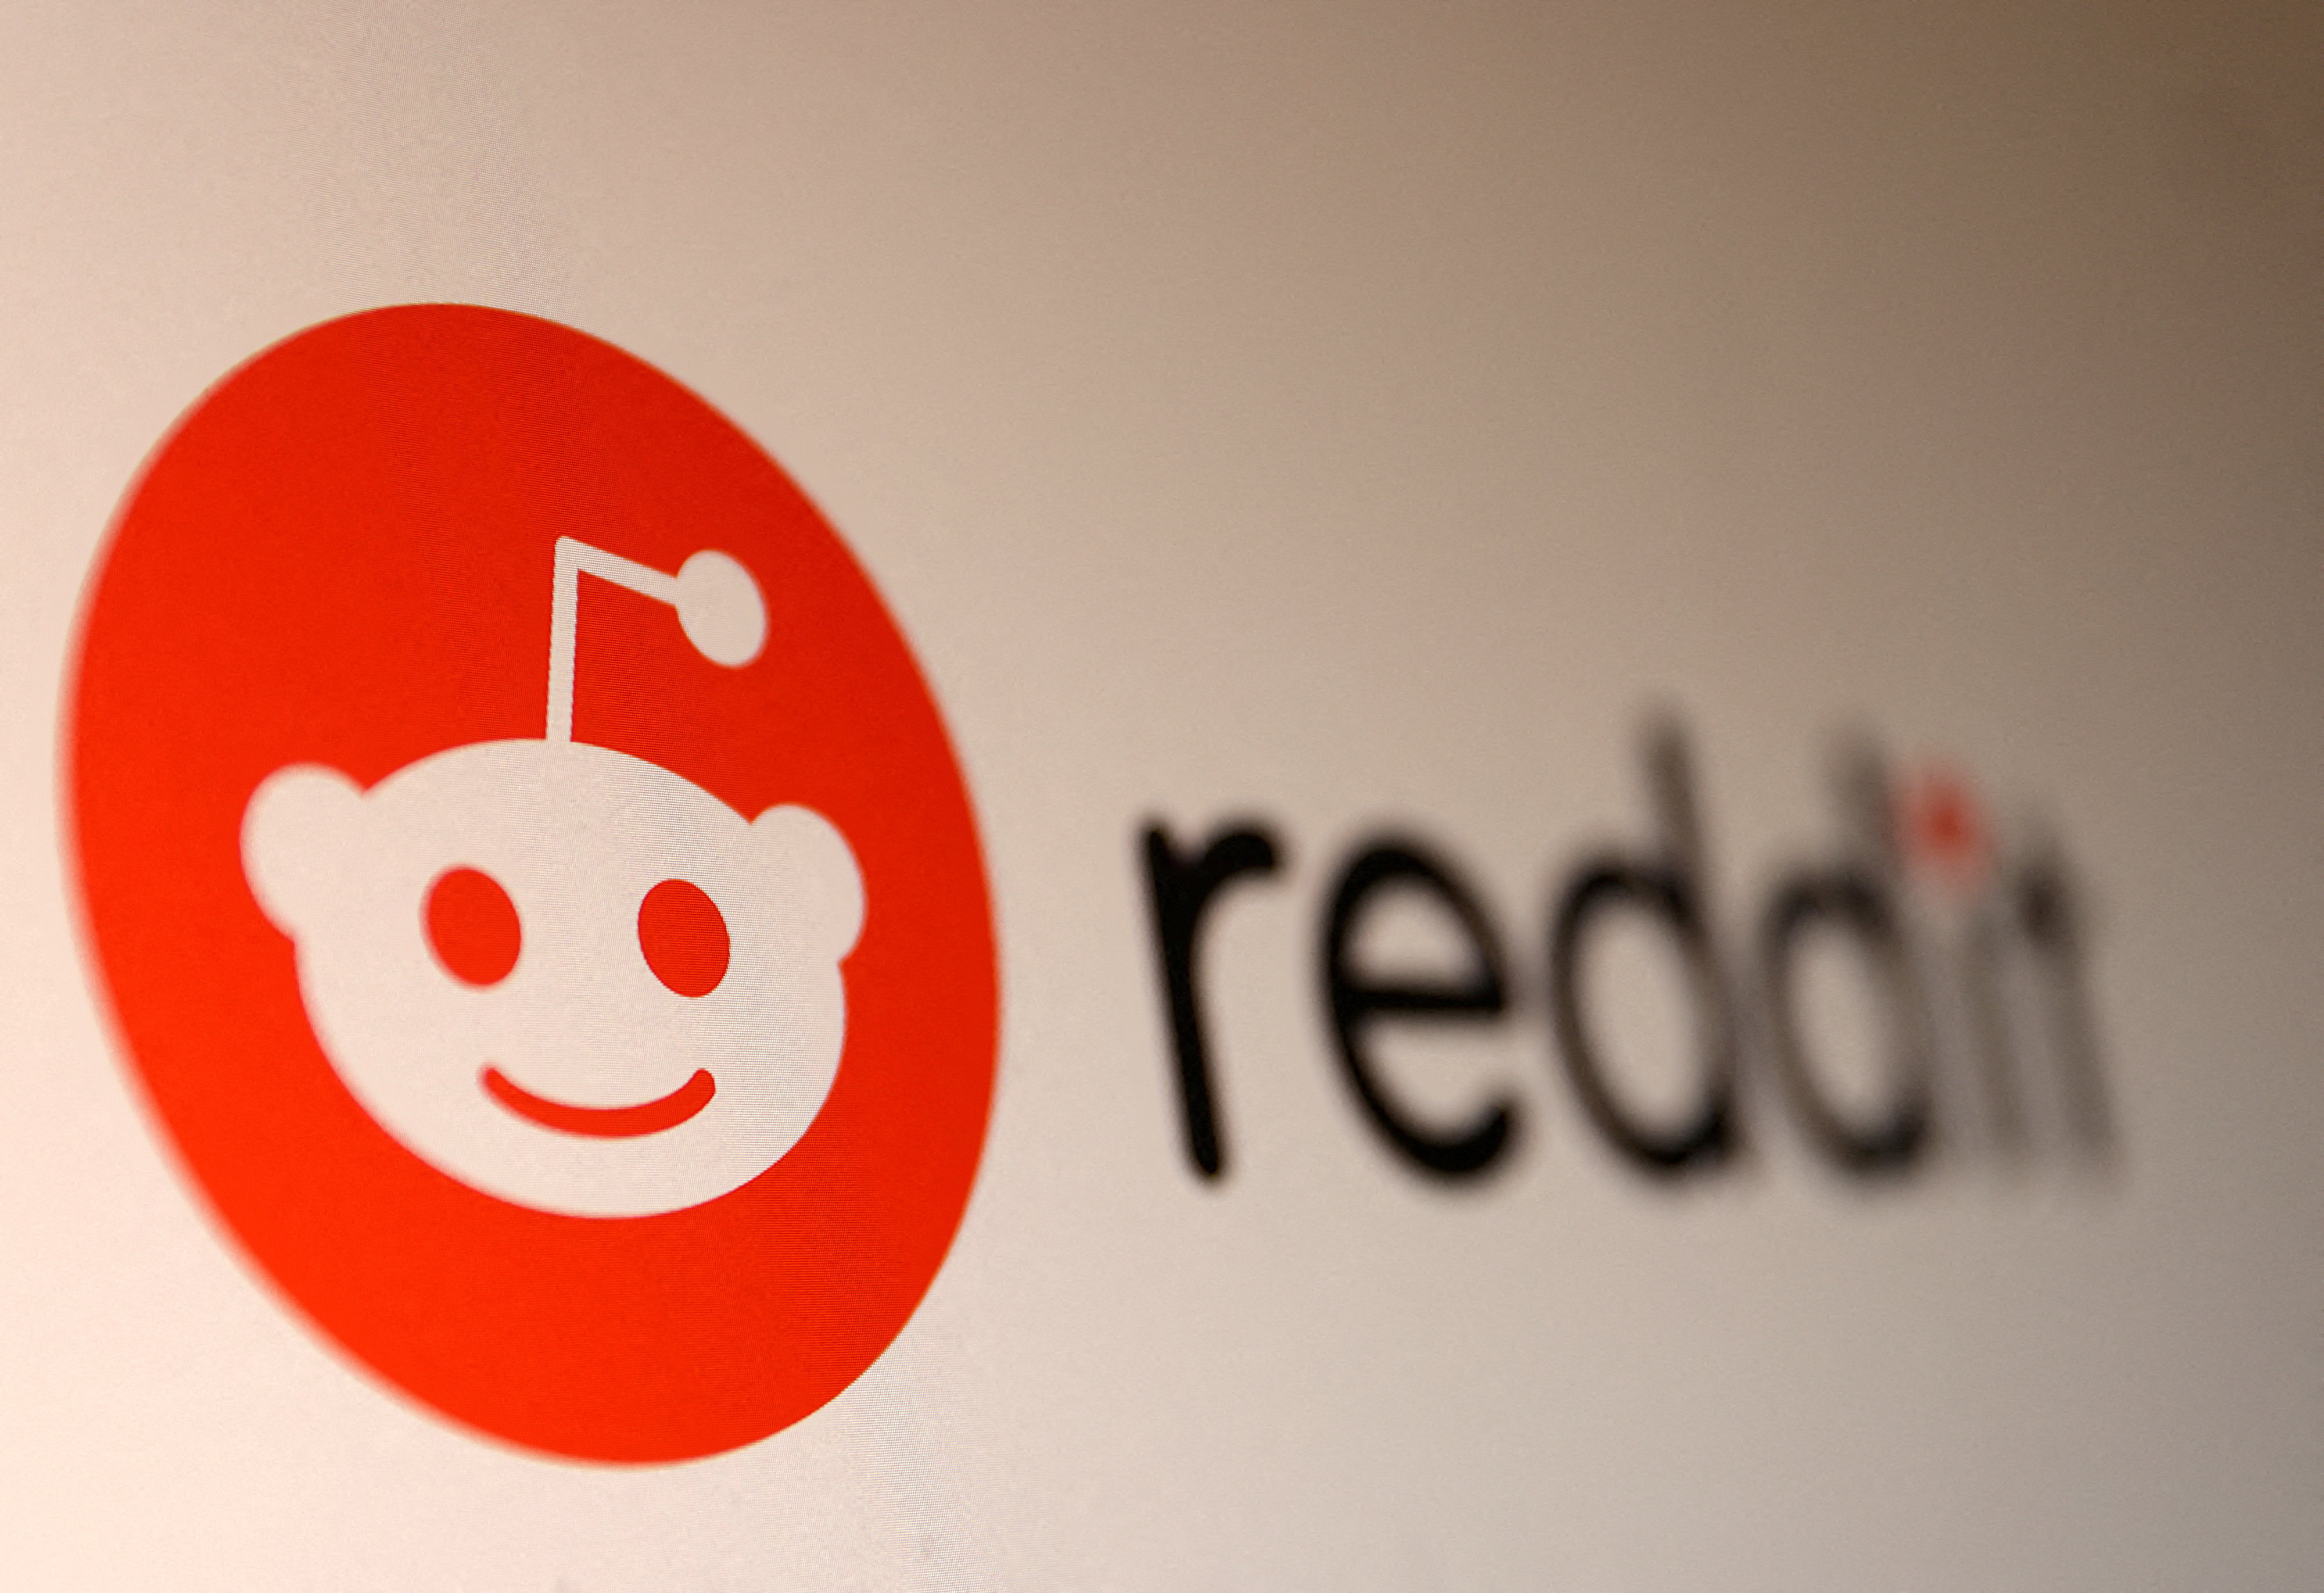 Reddit has filed publicly for an IPO in New York. Photo: Reuters